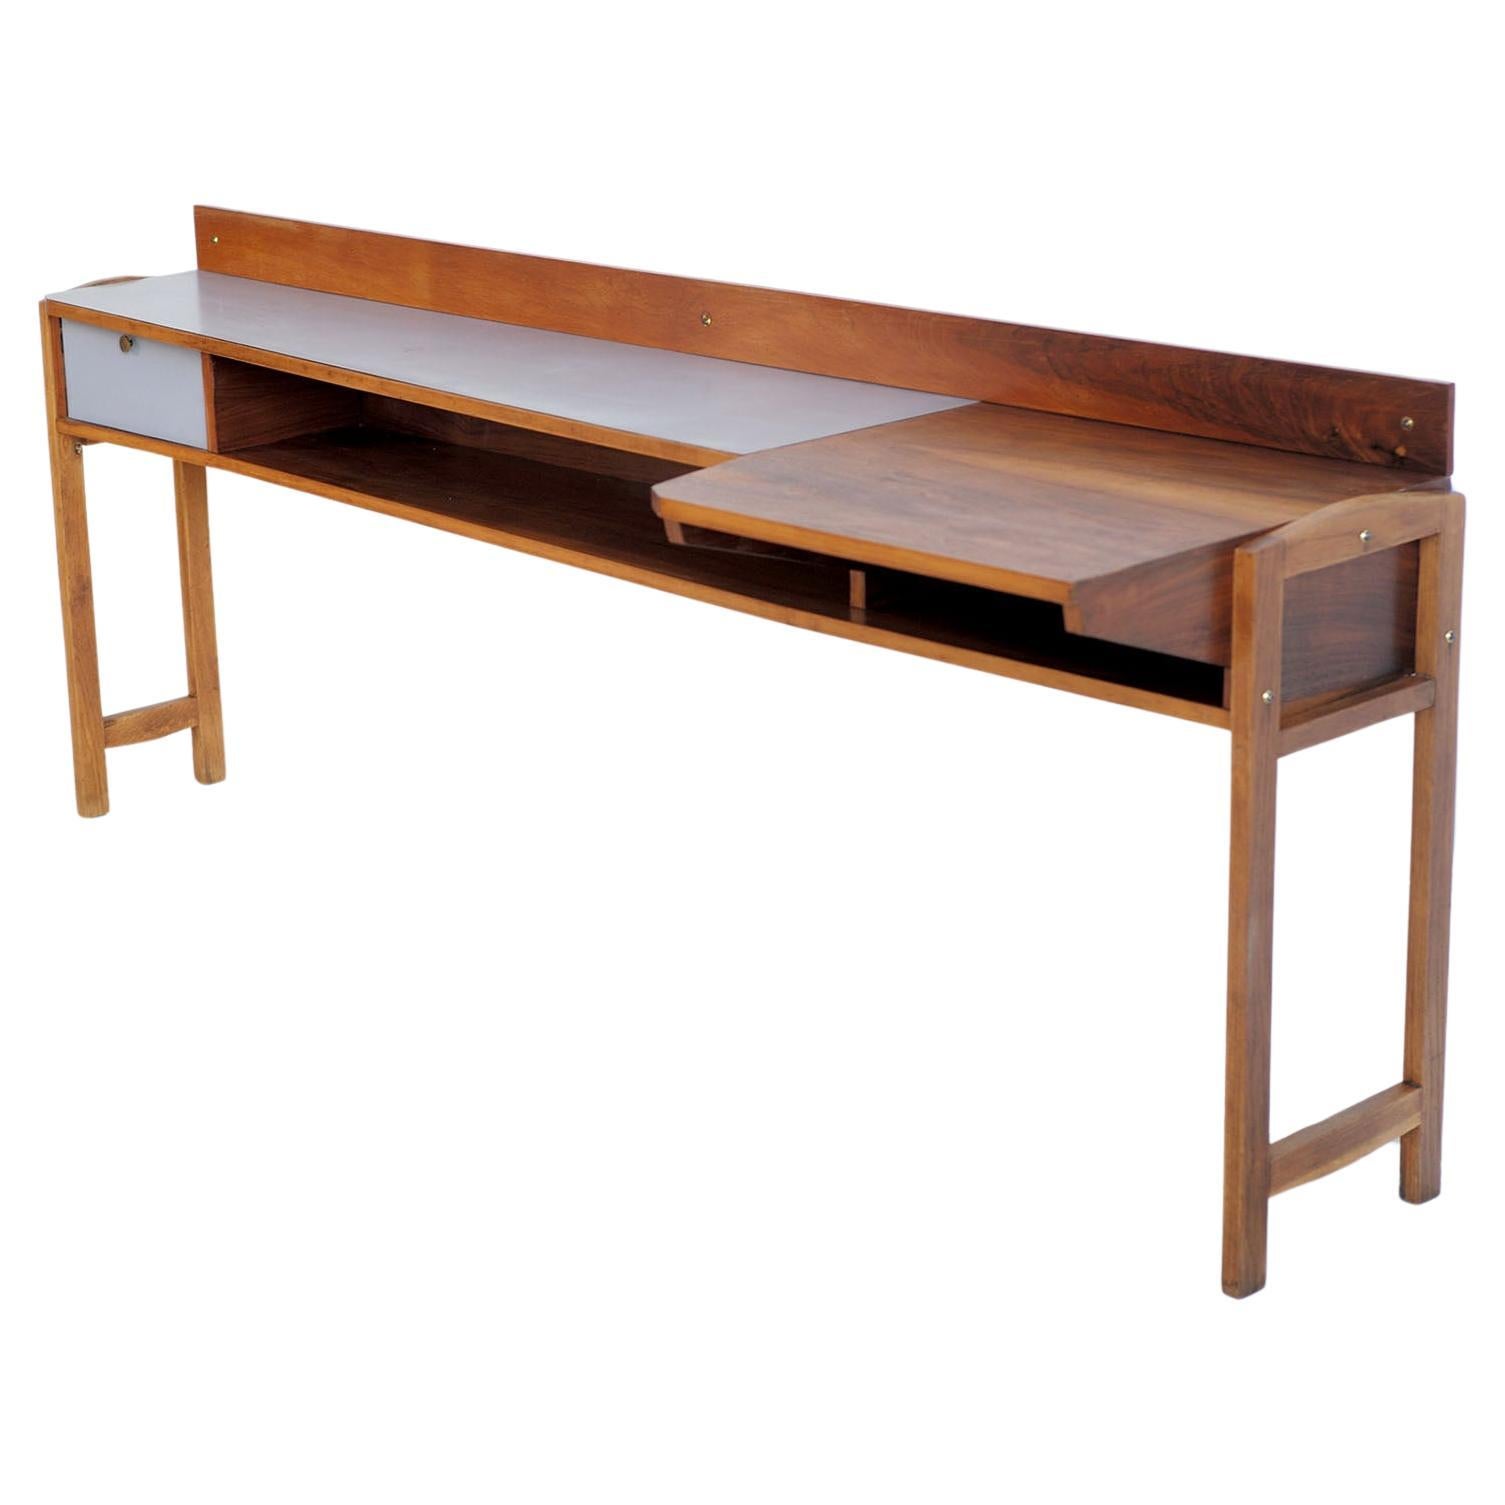 Console in flamed walnut and gray formica, Italy 1955